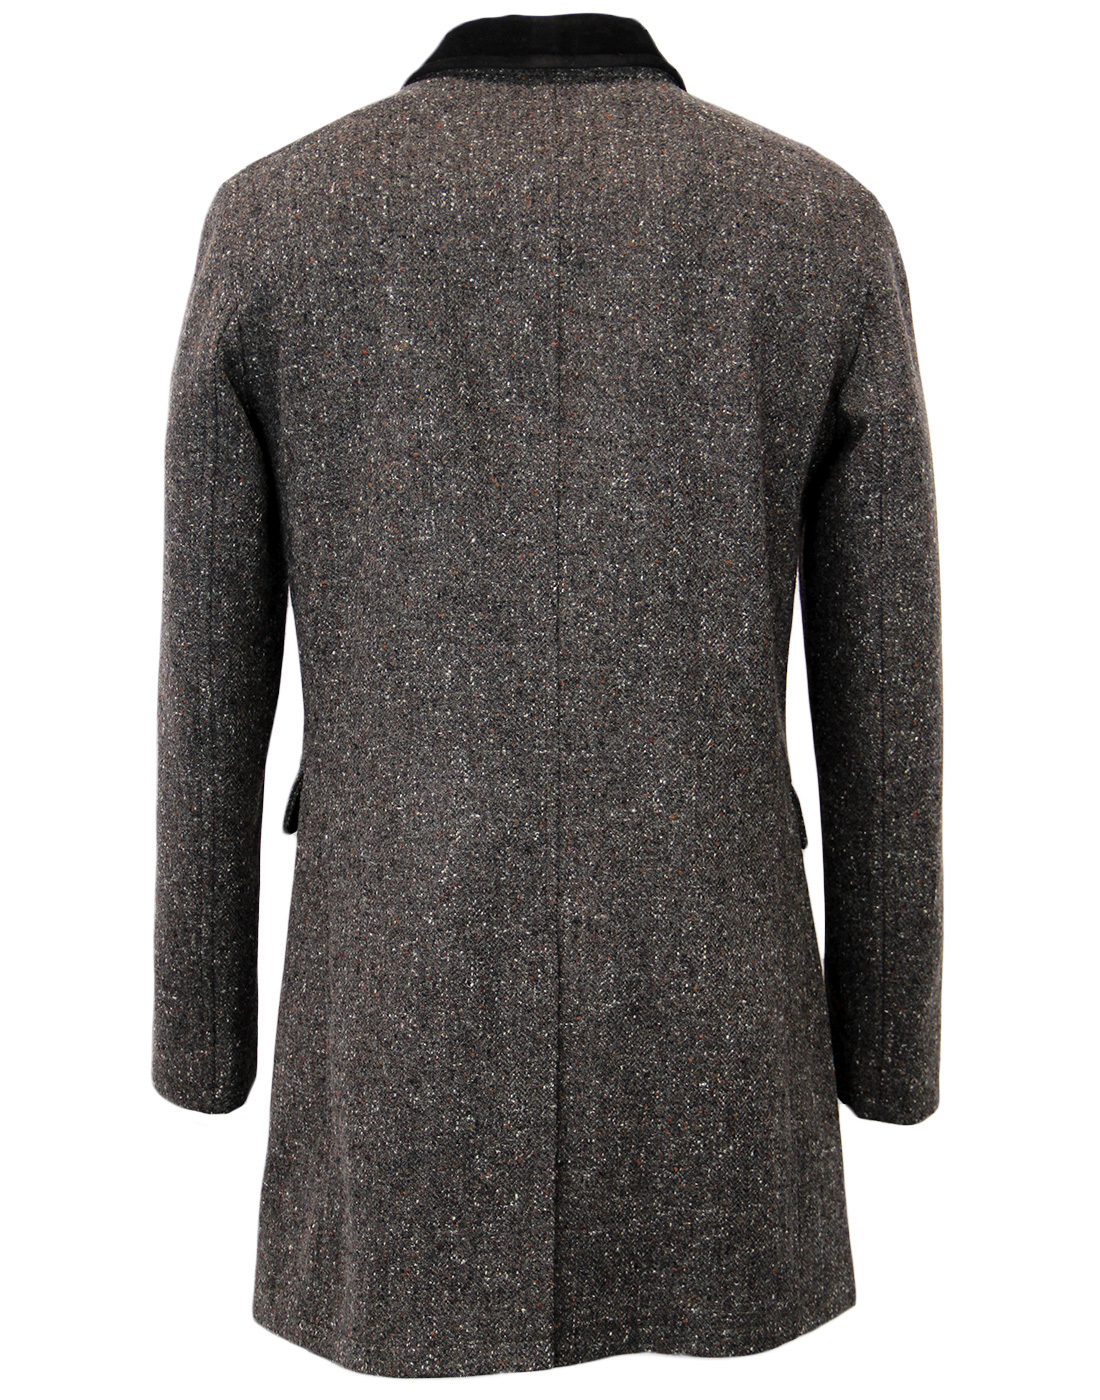 TAILORED by MADCAP ENGLAND Retro Mod Donegal Top Coat Grey